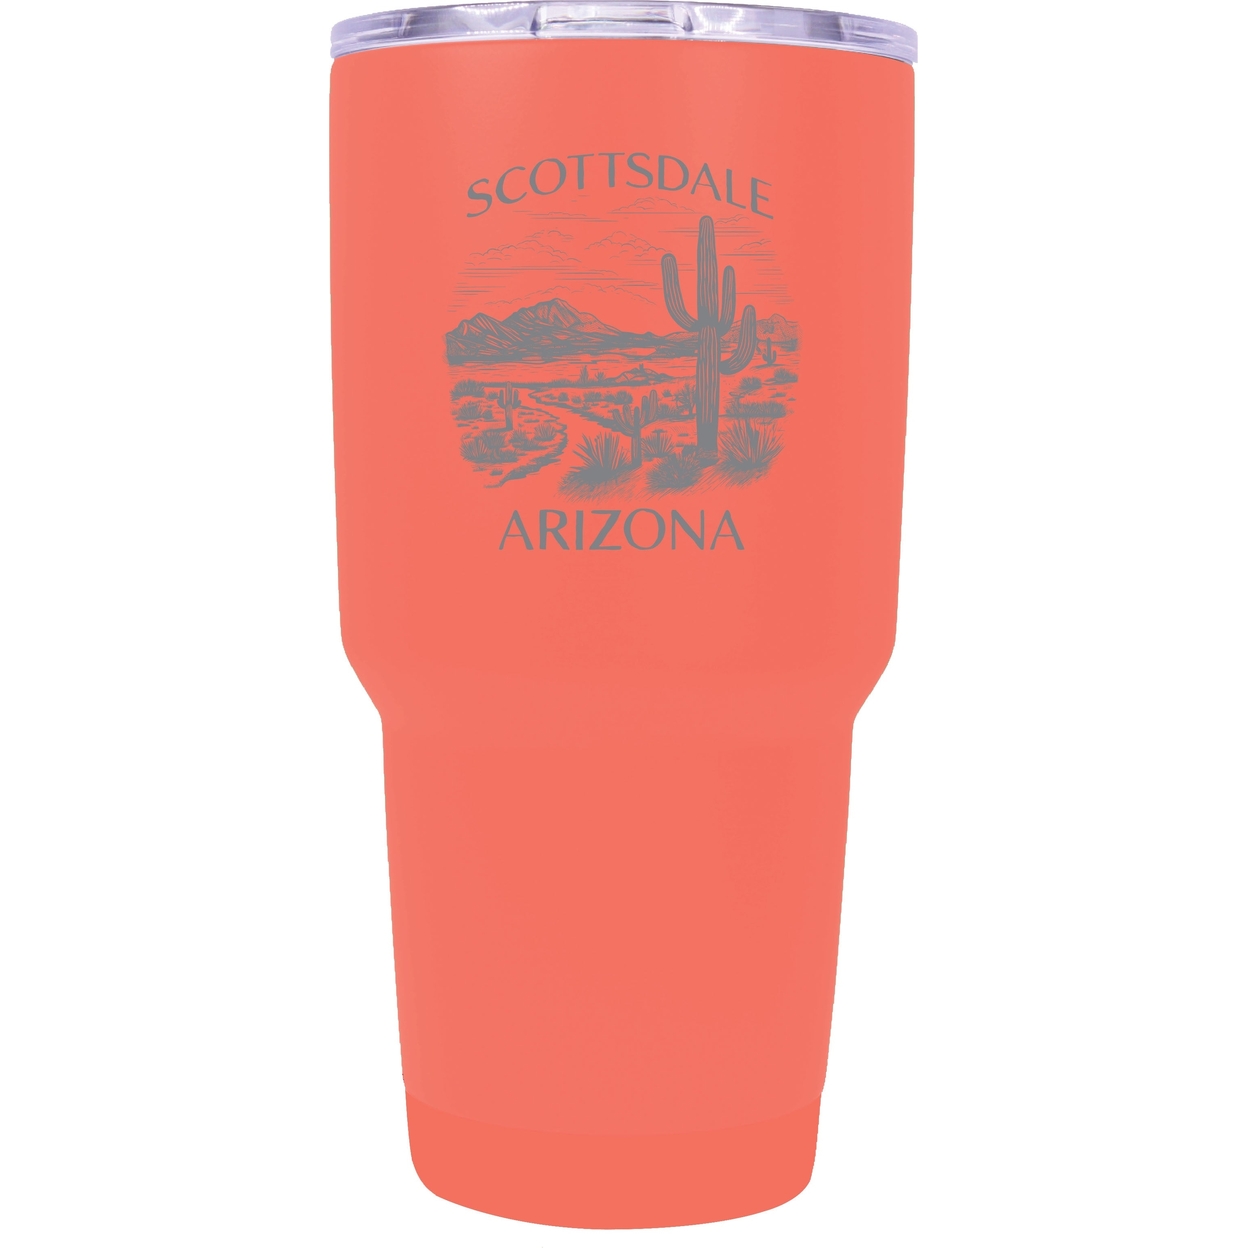 Scottsdale Arizona Souvenir 24 Oz Engraved Insulated Stainless Steel Tumbler - Coral,,2-Pack